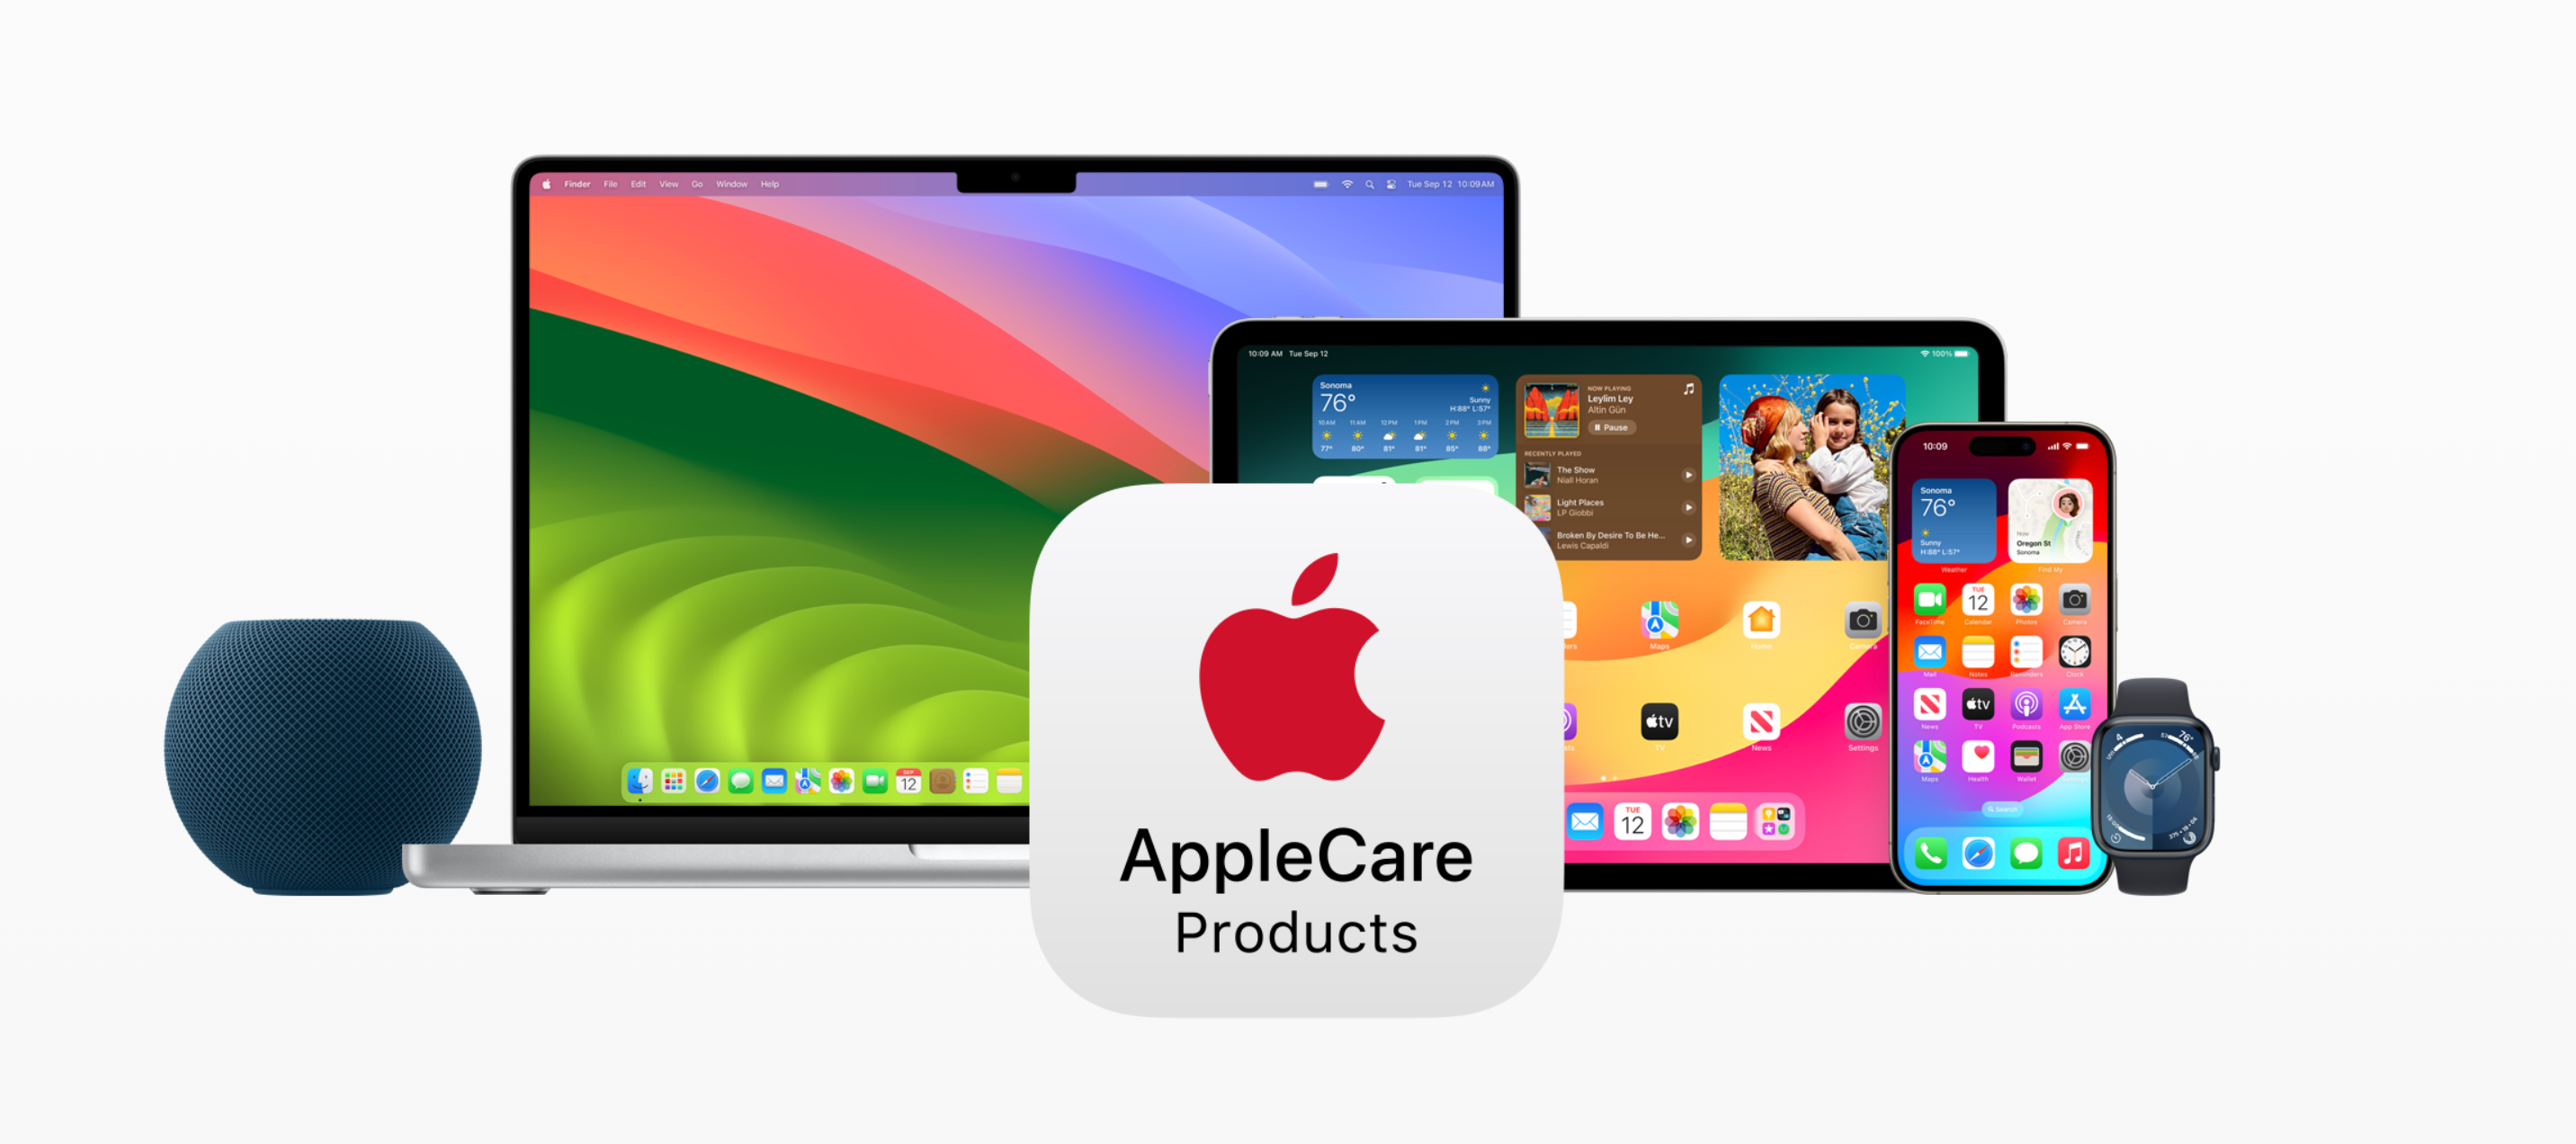 An Apple ad showing various products that are compatible with AppleCare including the HomePod, Mac, iPad, Apple Watch and iPhone.